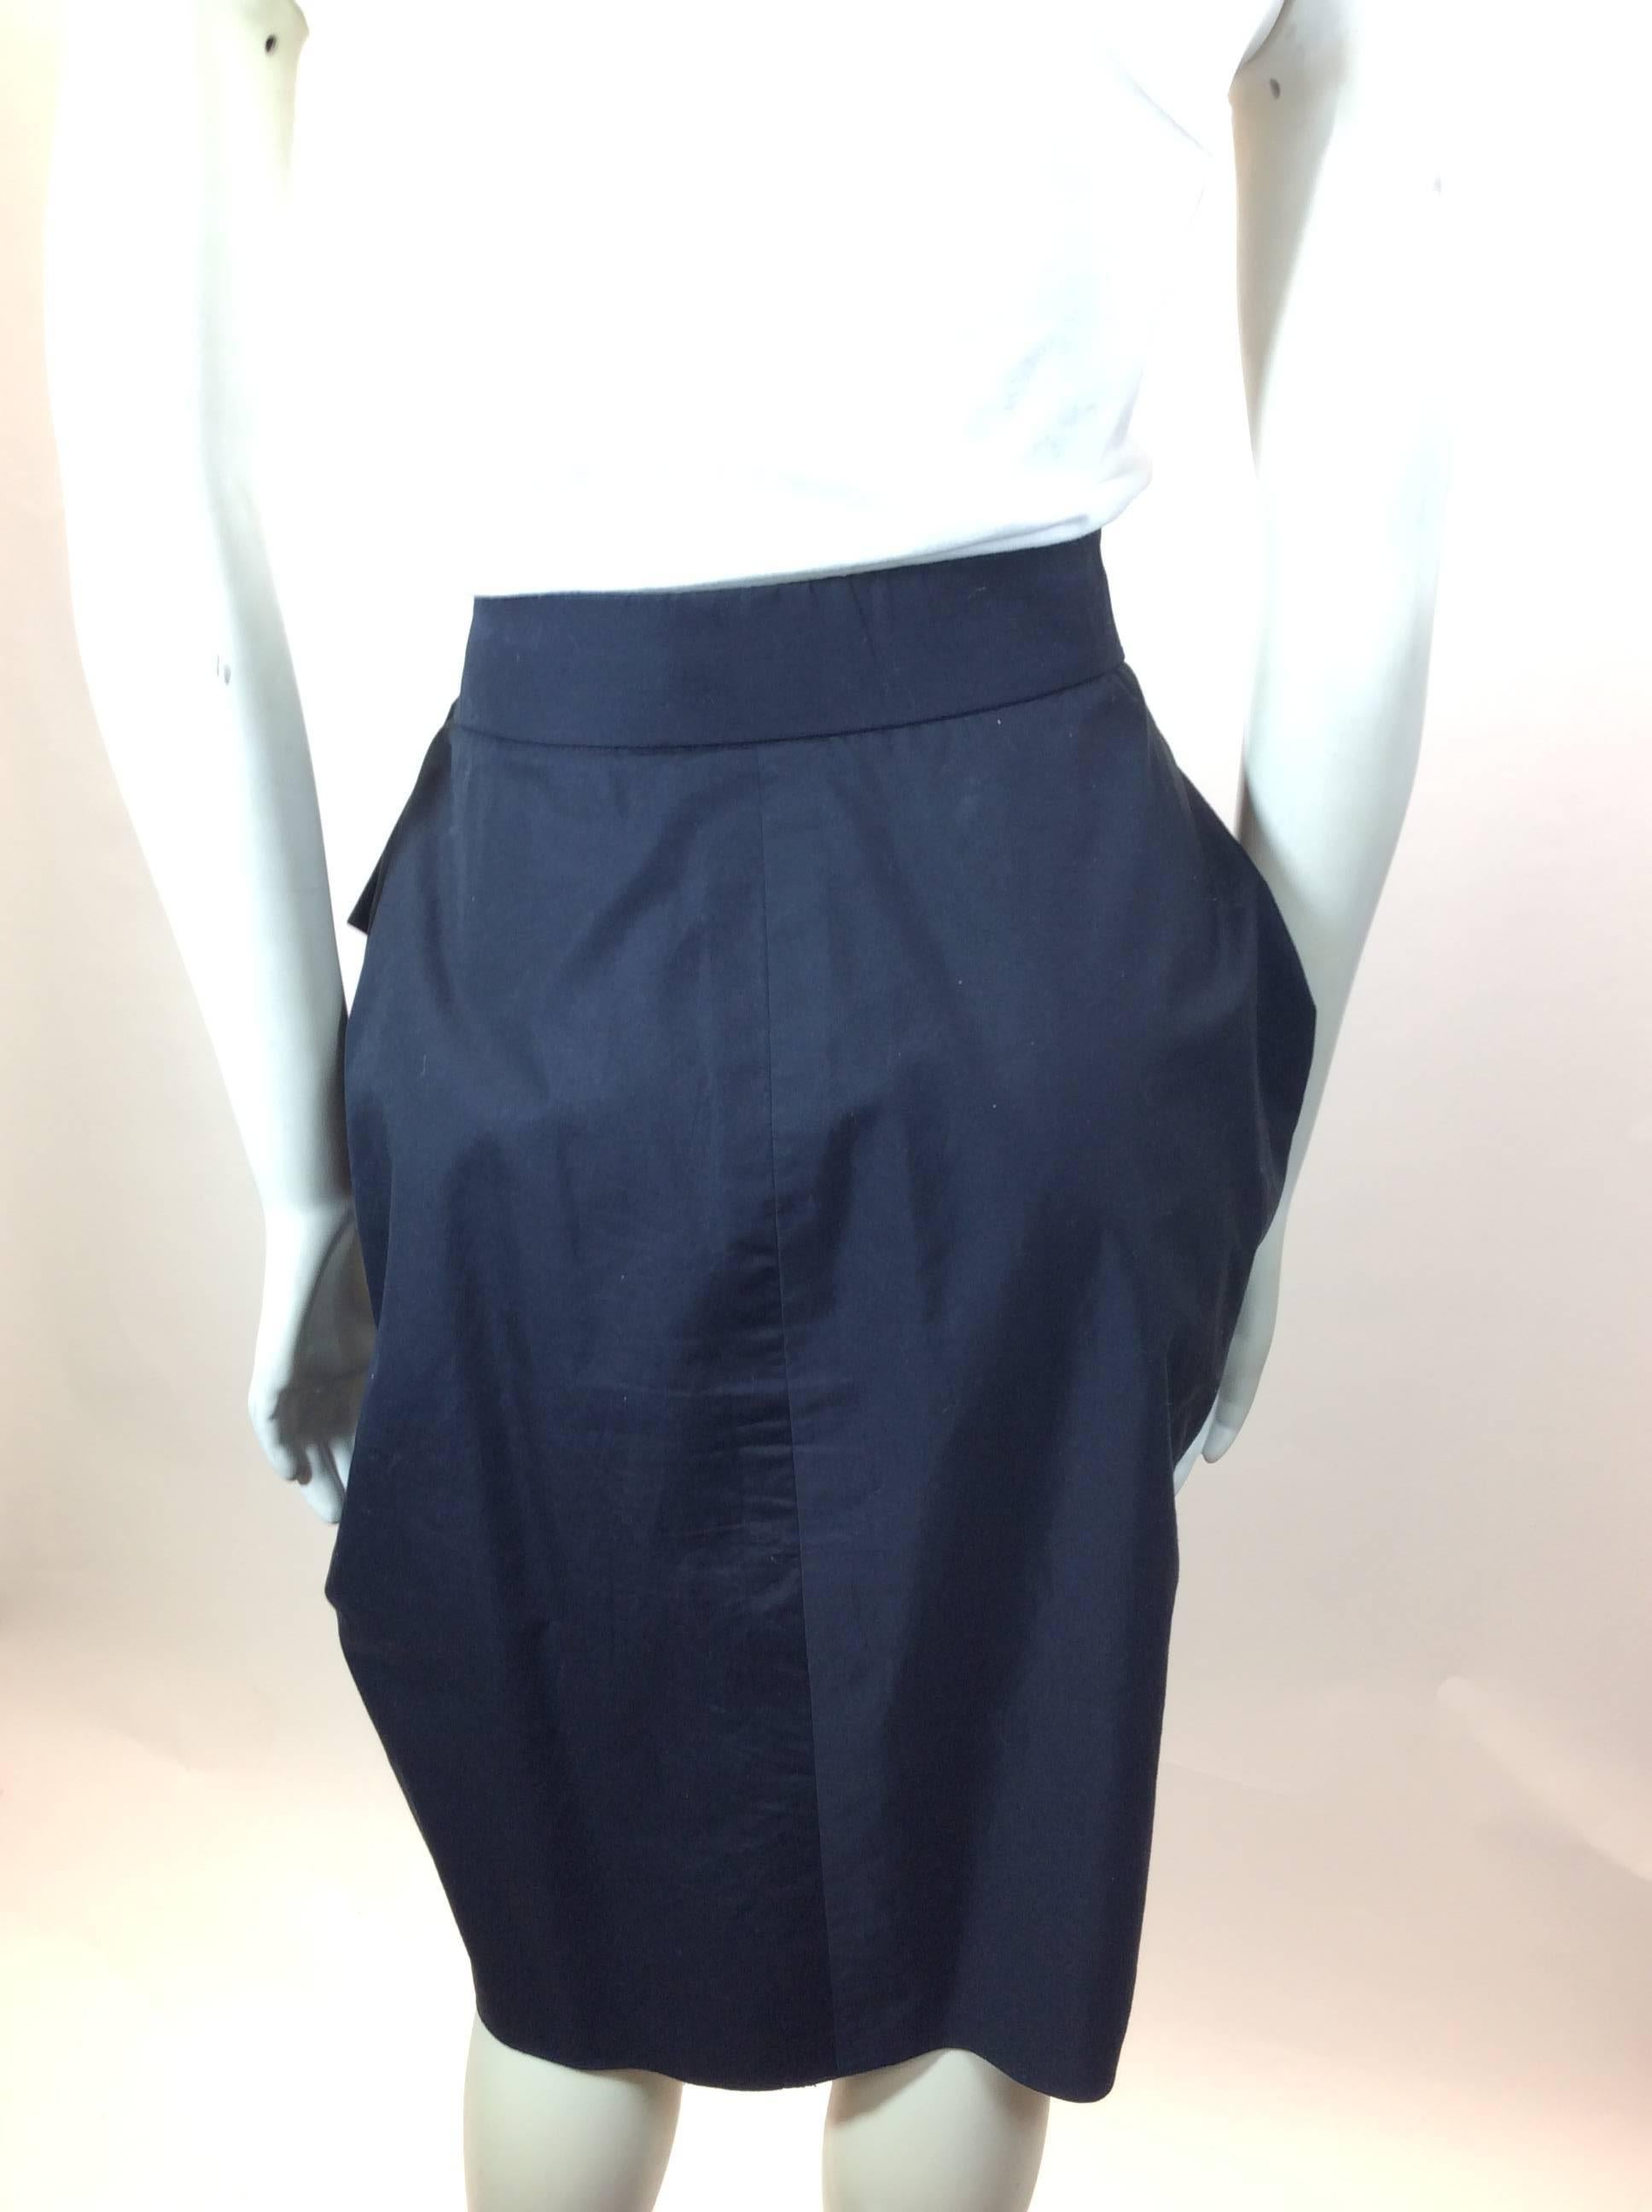 Donna Karan Black Cotton Skirt With Bow  In Excellent Condition For Sale In Narberth, PA